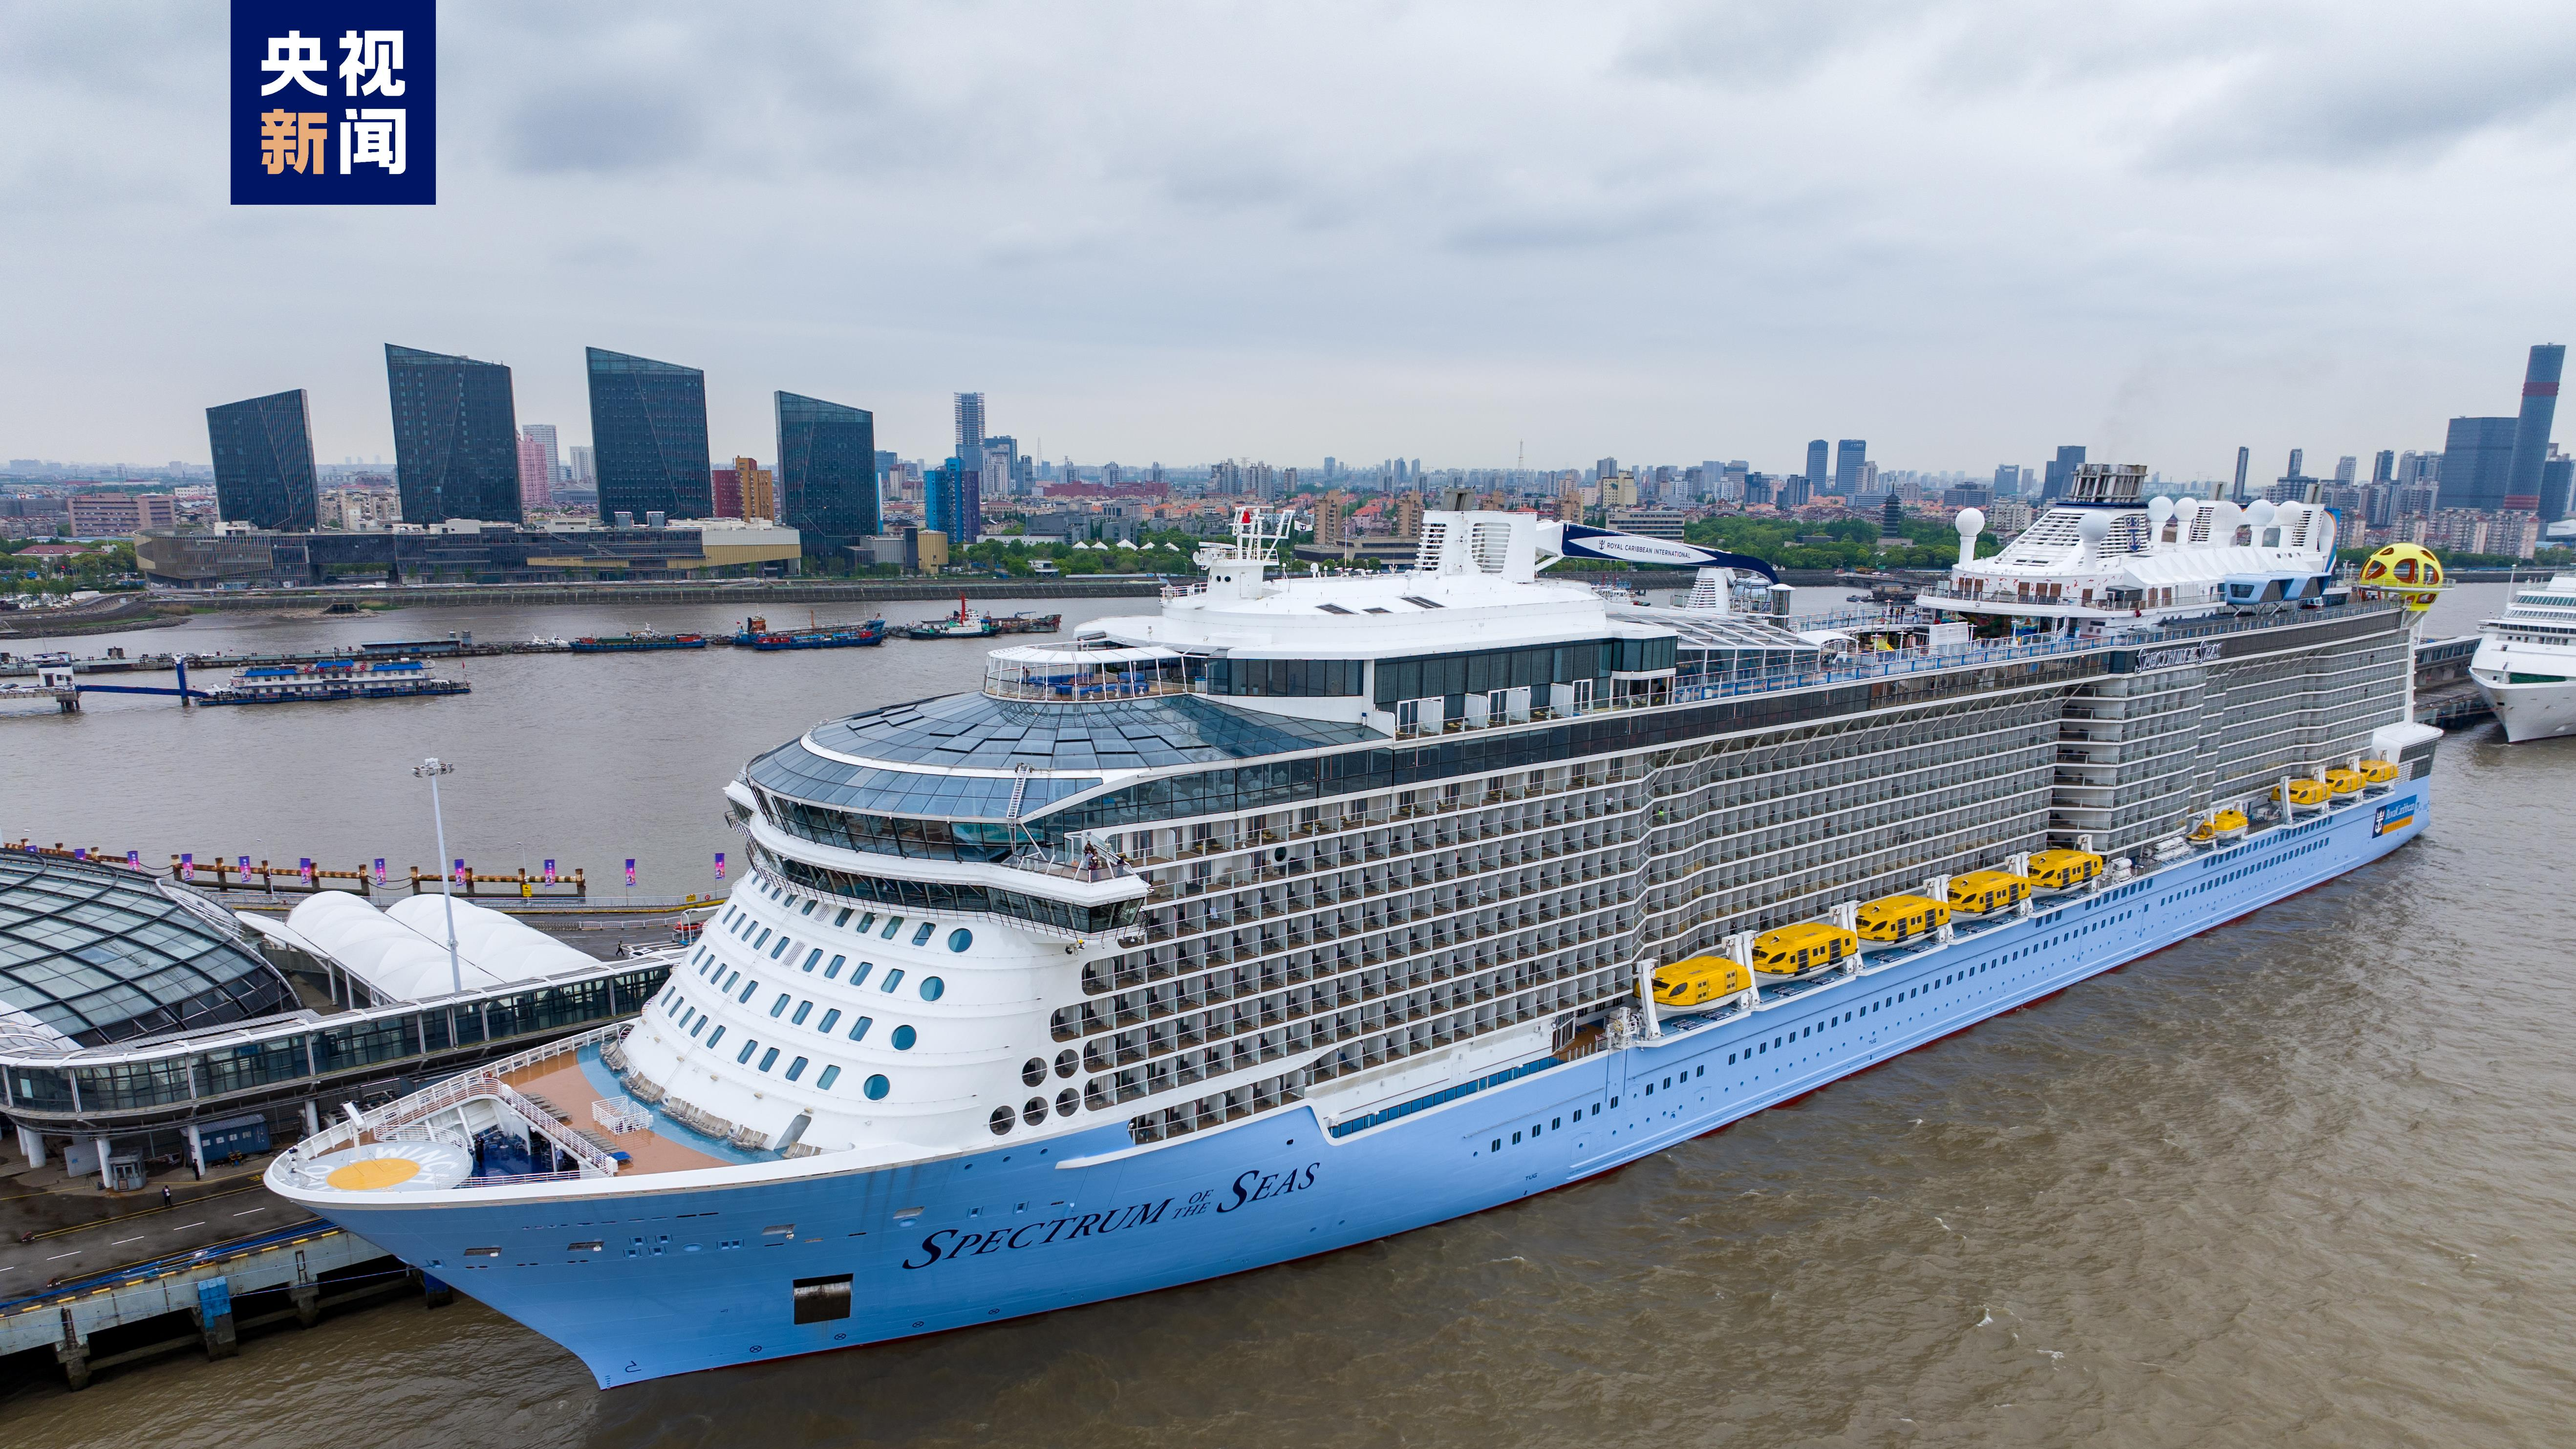 The Spectrum of the Seas, a Quantum-Ultra-class cruise ship operated by Royal Caribbean International, docked at at the Shanghai Wusongkou International Cruise Terminal in east China's Shanghai, April 26, 2024. /CMG